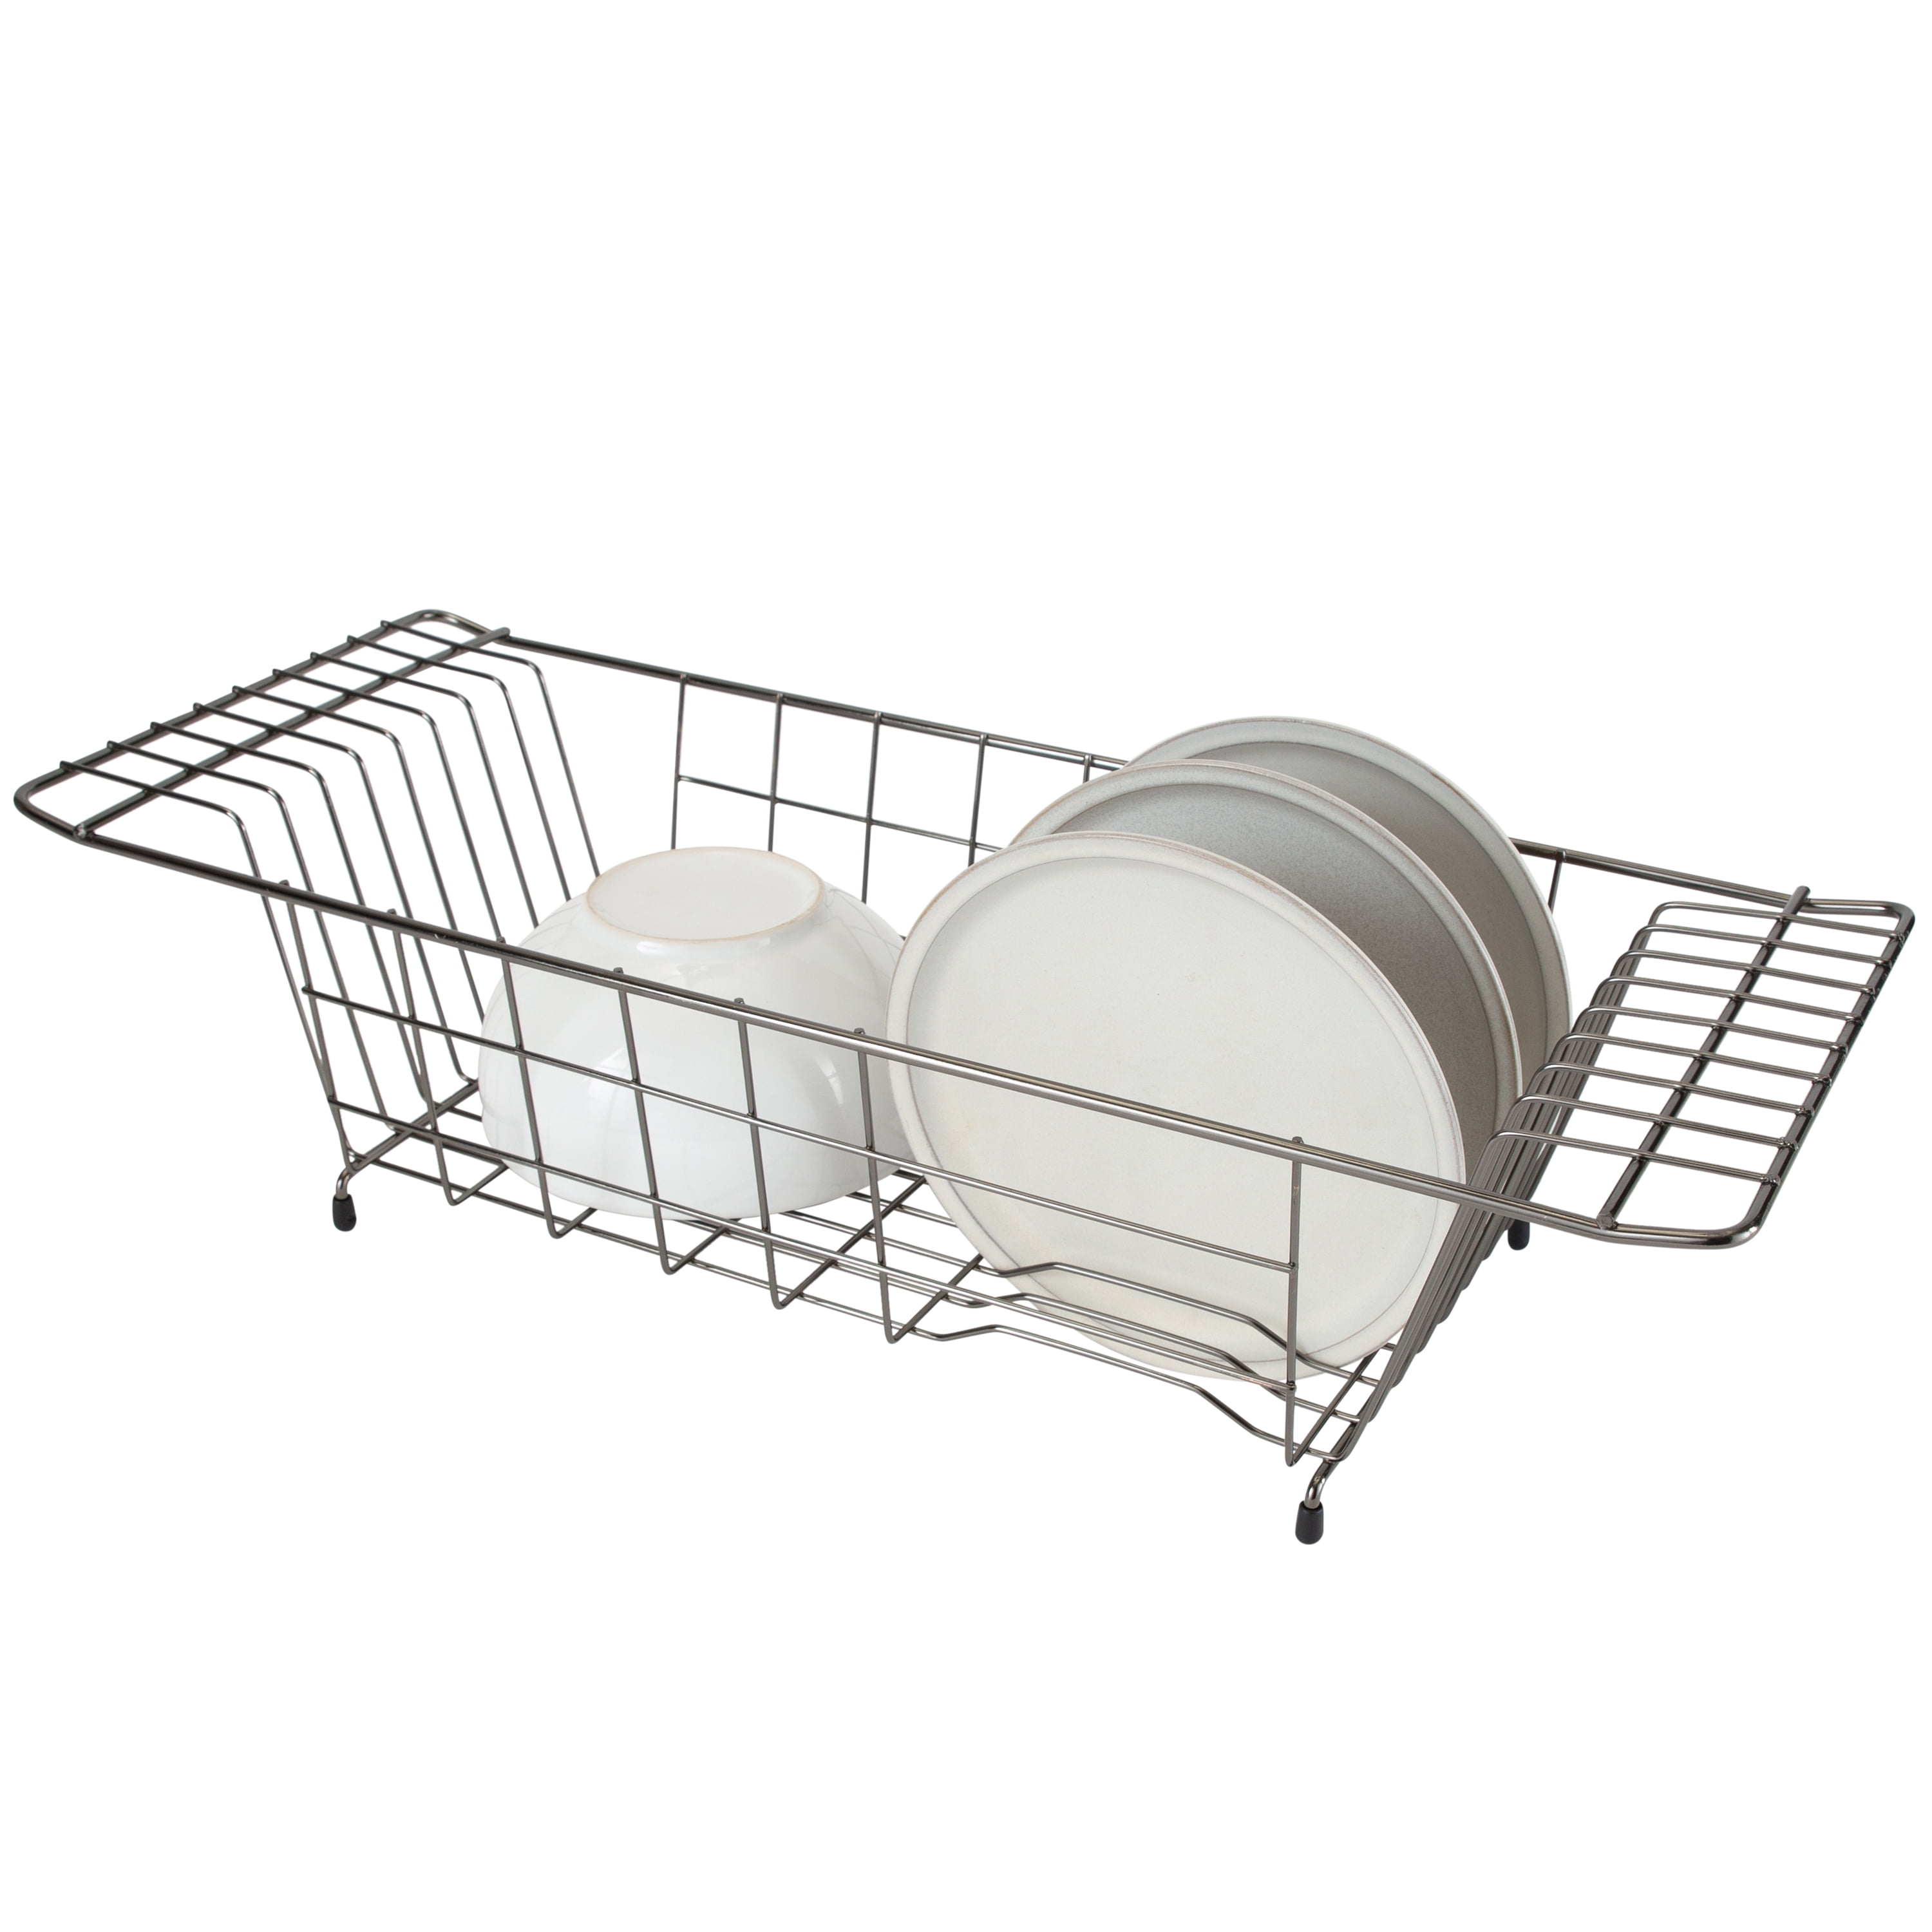 This $12 Dish Drying Rack Is Saving  Shoppers Counter Space